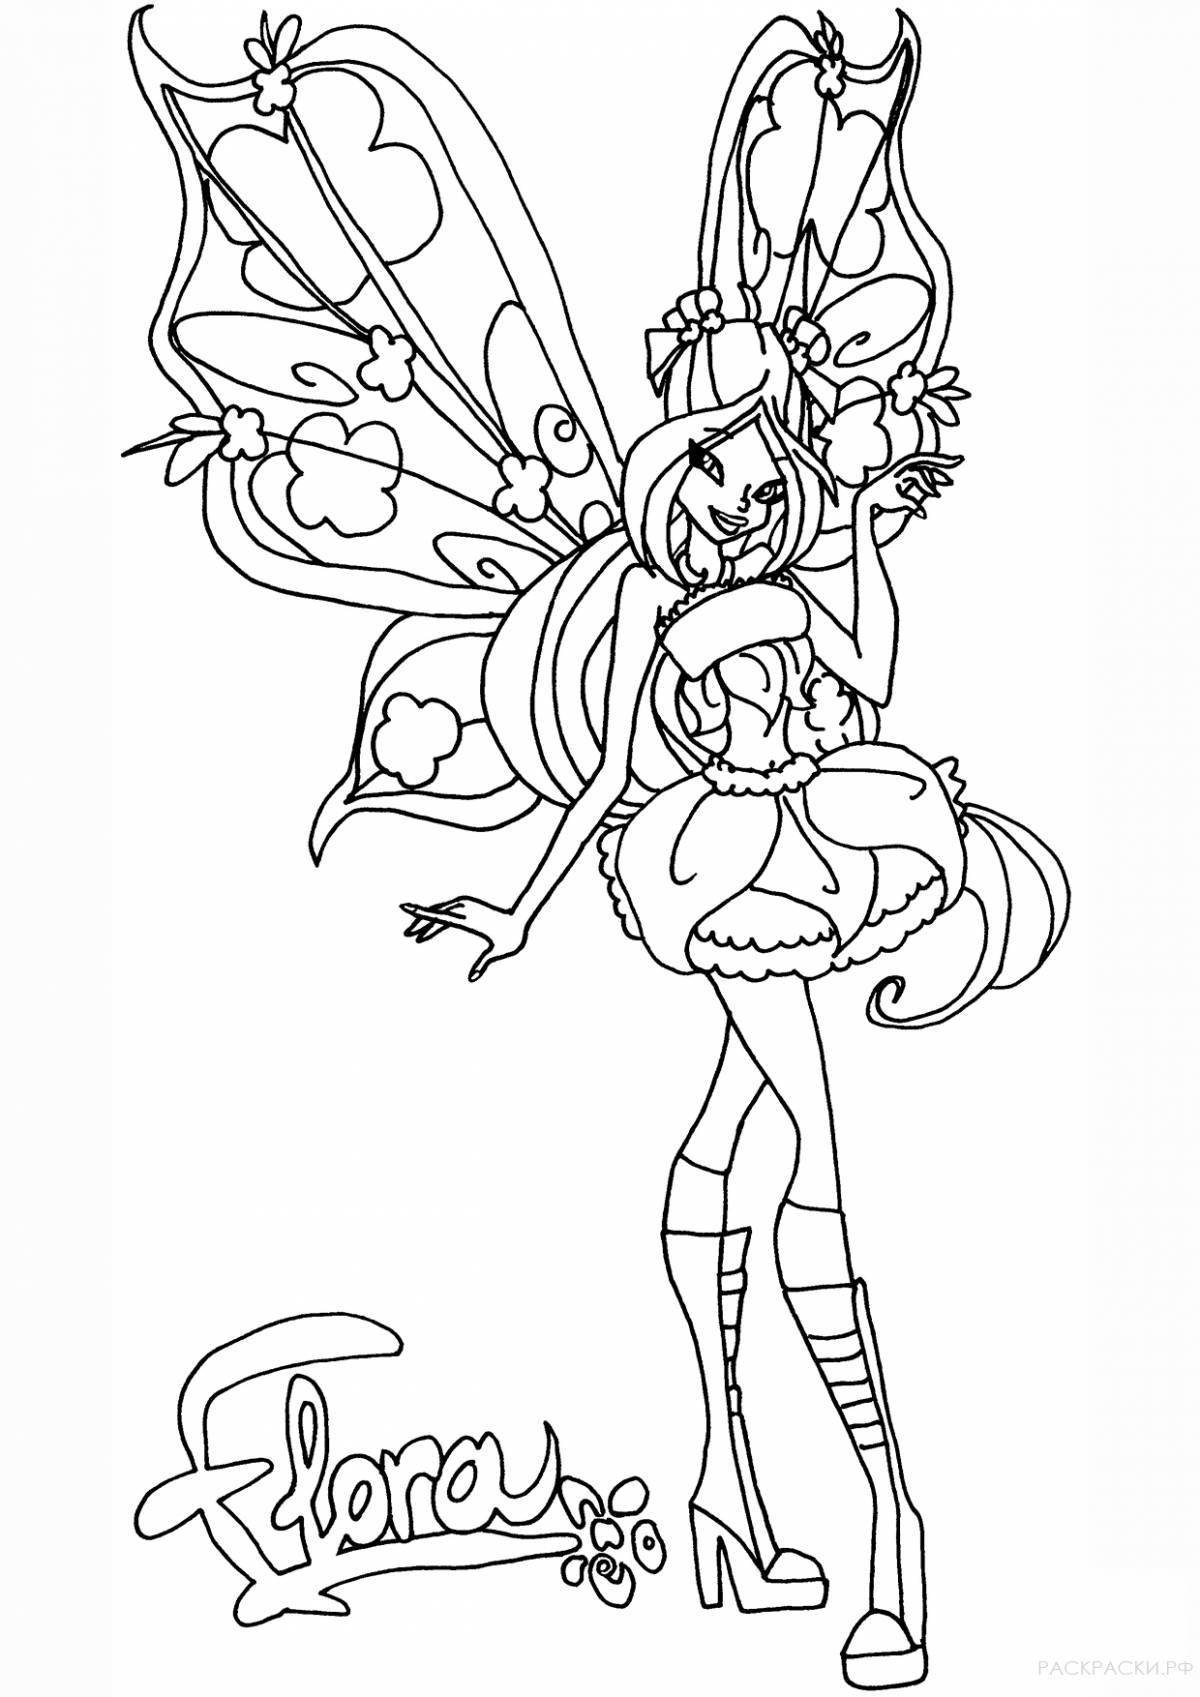 Charming coloring cartoon flora team coloring page